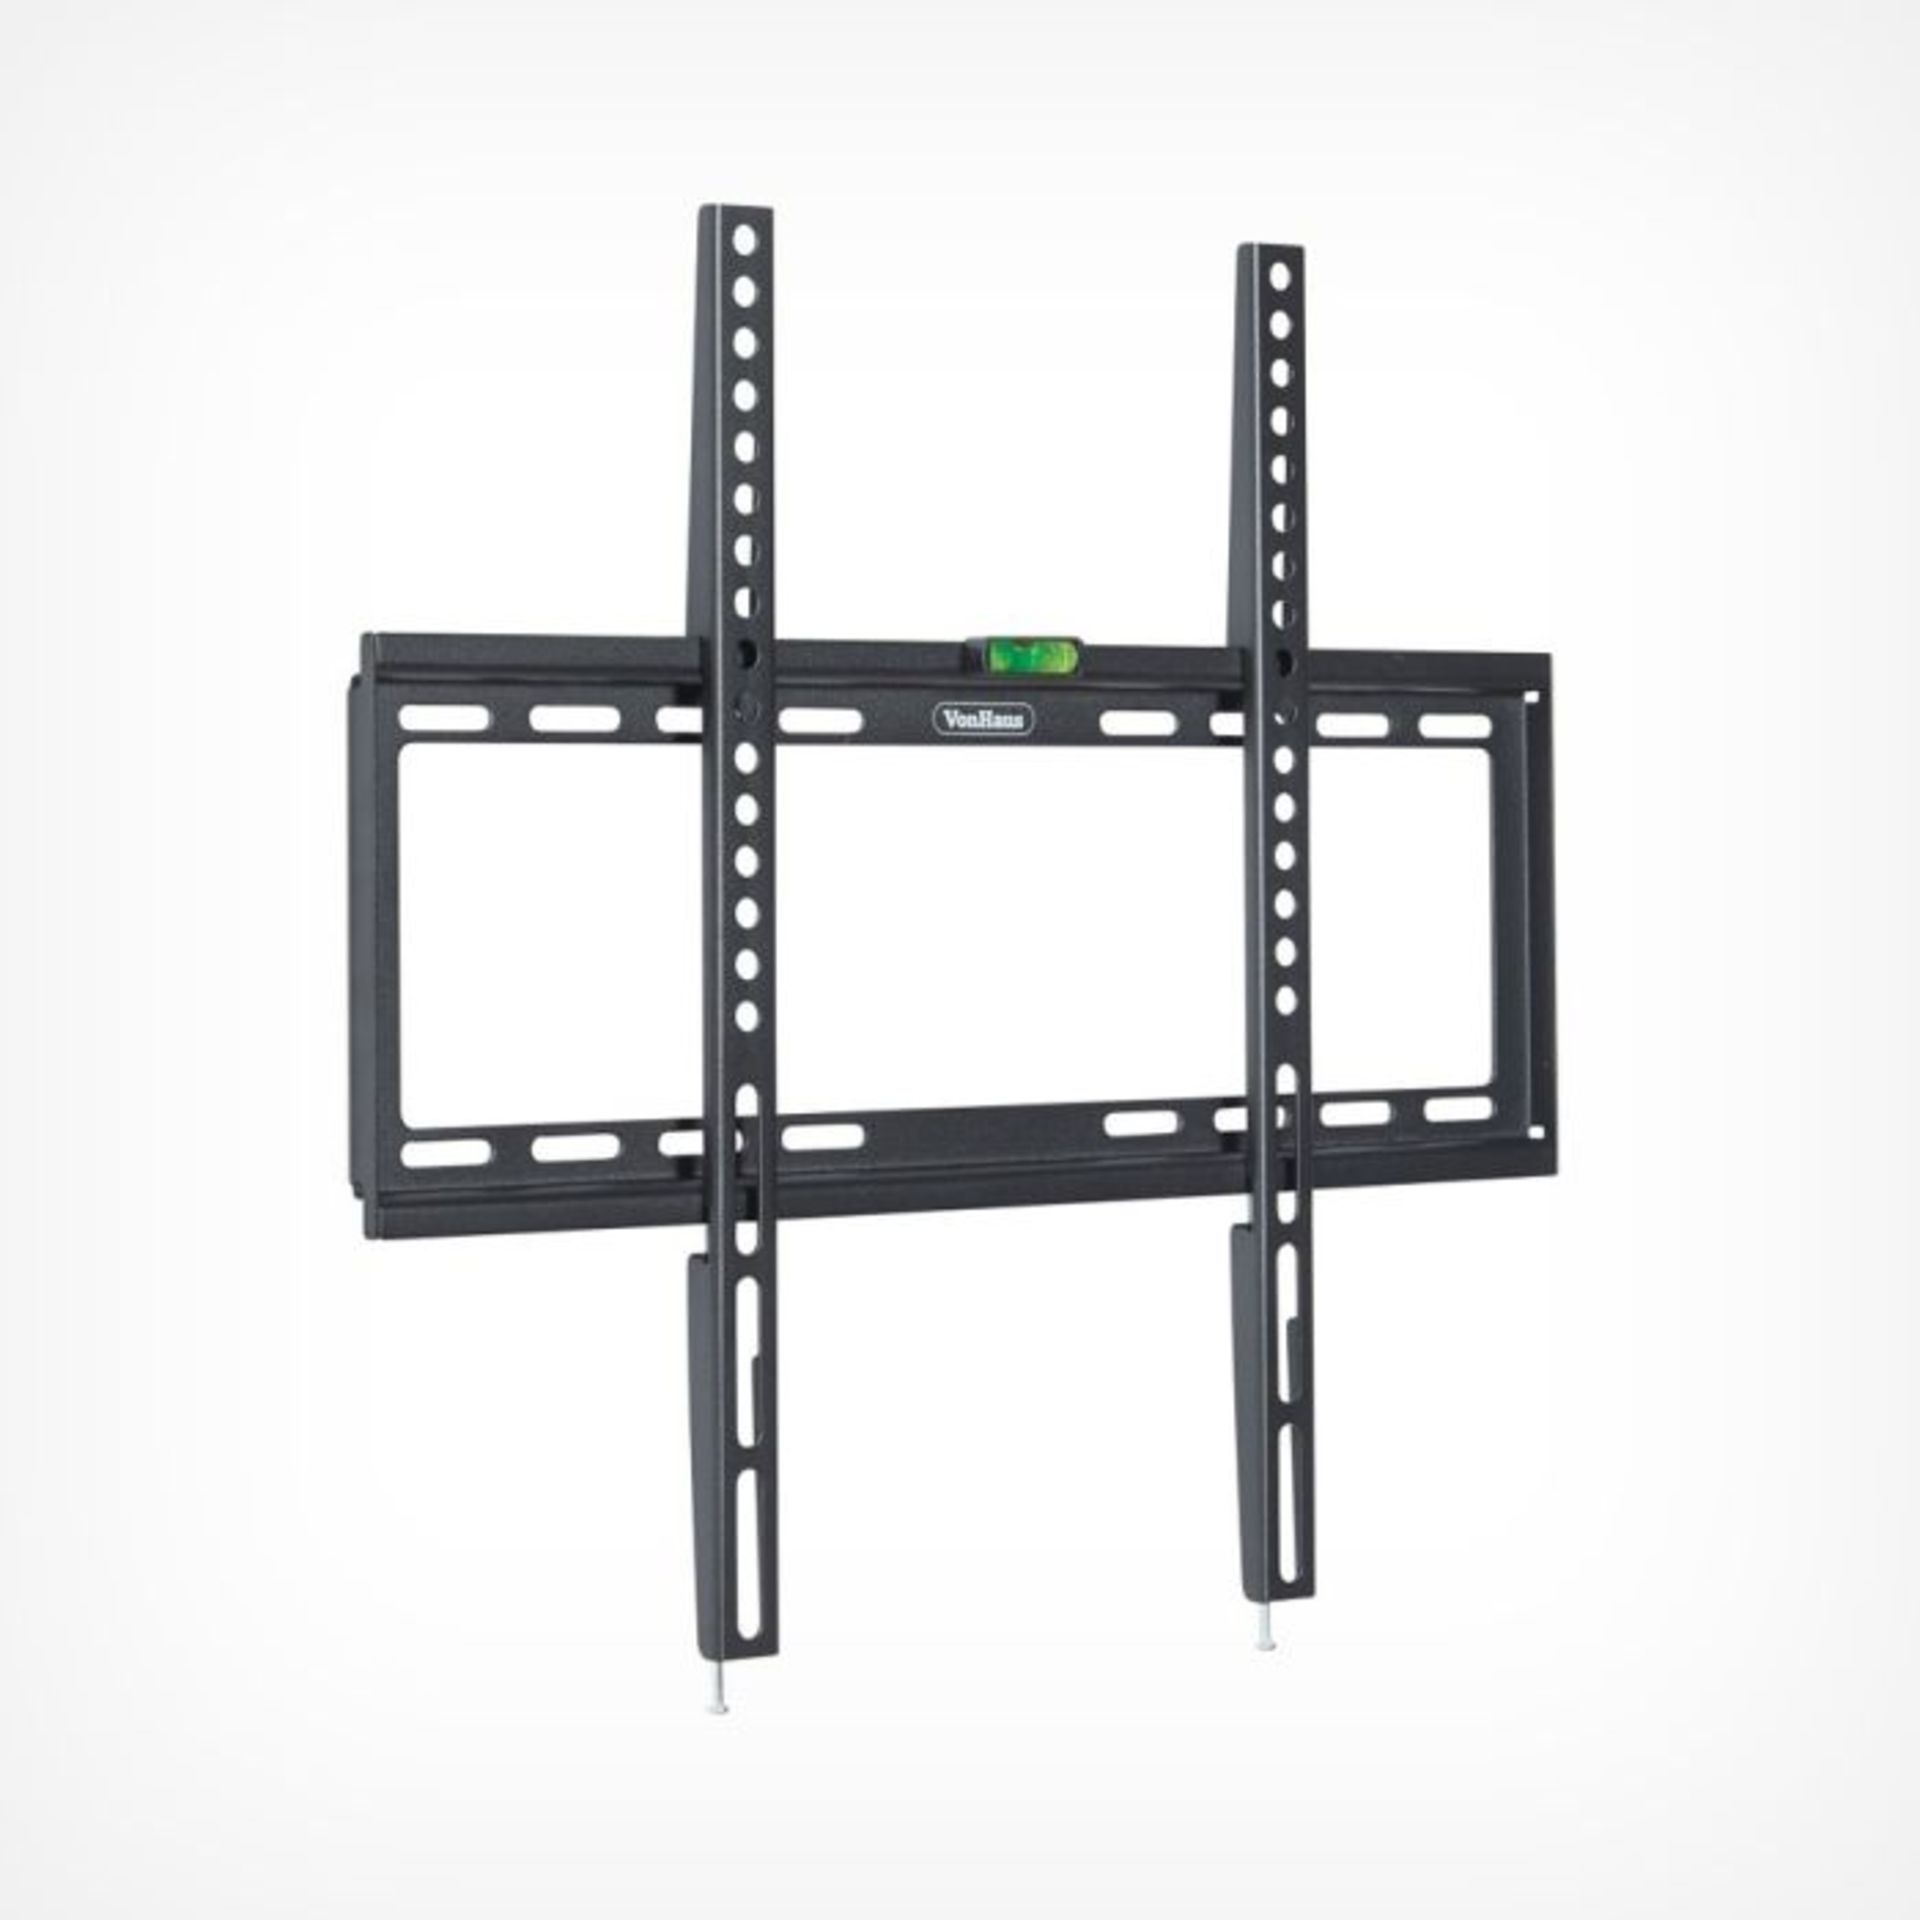 32-55 inch Flat-to-wall TV bracket. With easy to follow, comprehensive assembly instructions